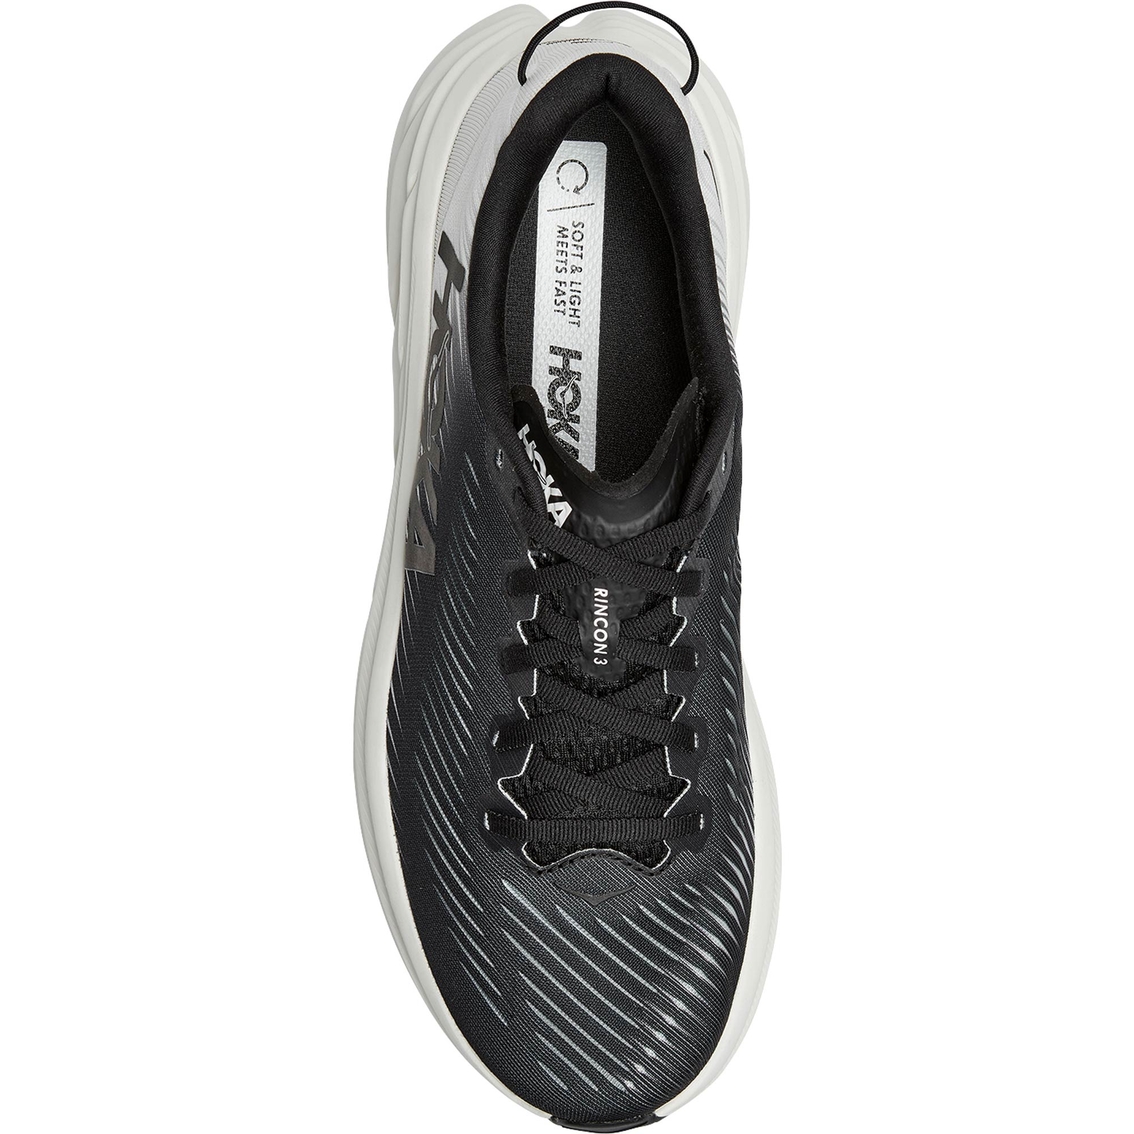 Hoka One One Men's Rincon 3 Running Shoes | Men's Athletic Shoes ...